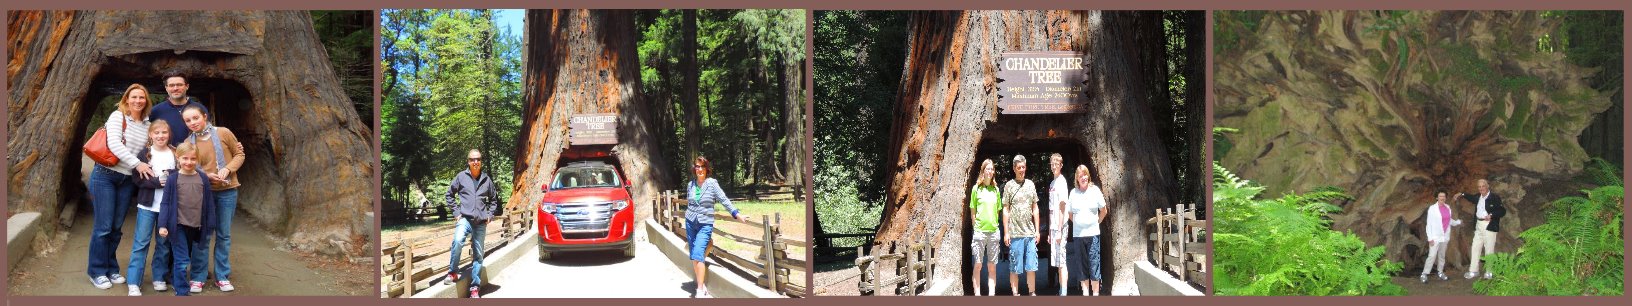 Redwood-Sightseeing-Tours-All-You-Need-to-Know